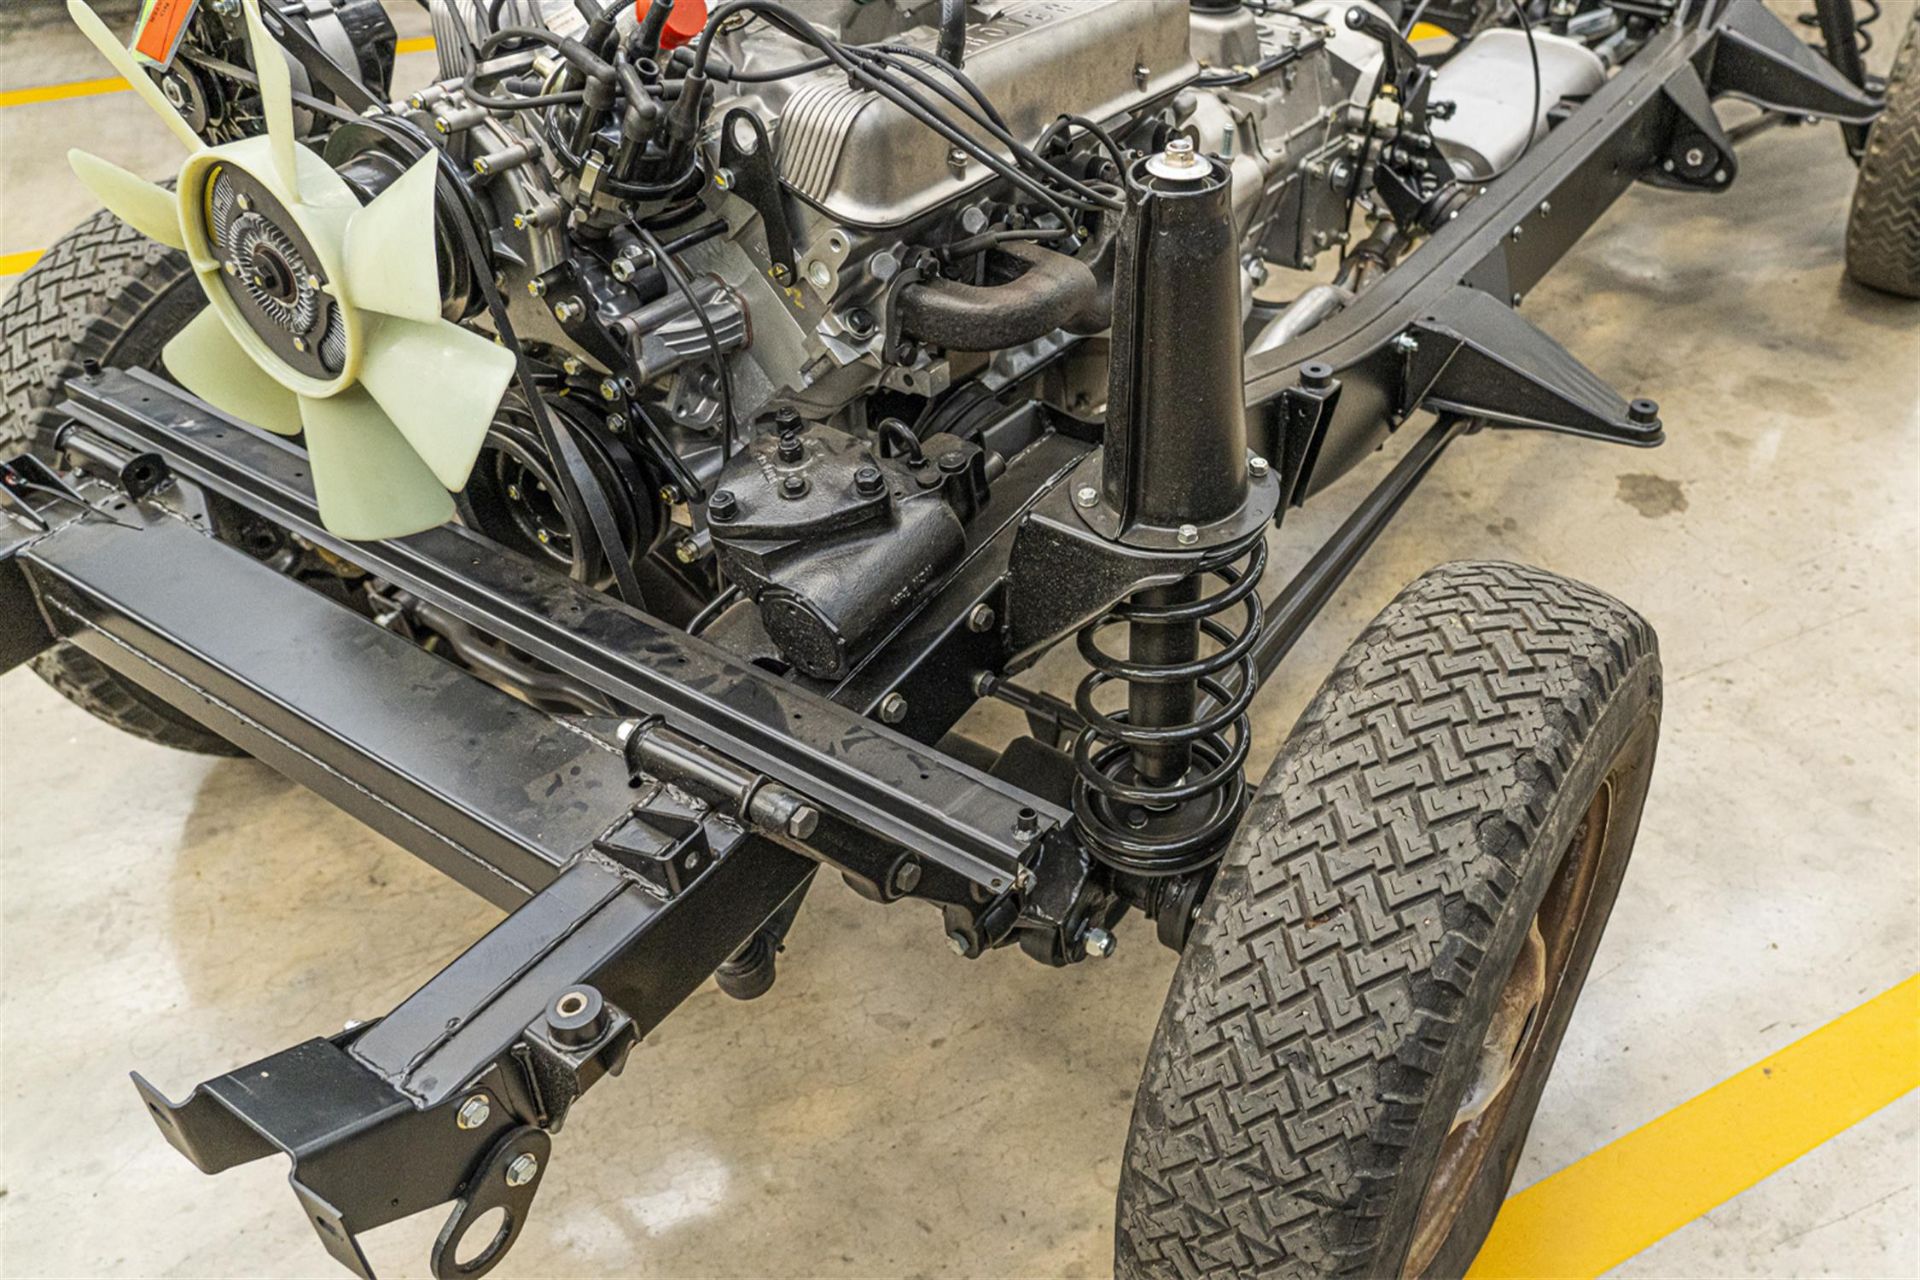 1976 Range Rover 'Suffix D' Rolling Chassis - Image 5 of 5